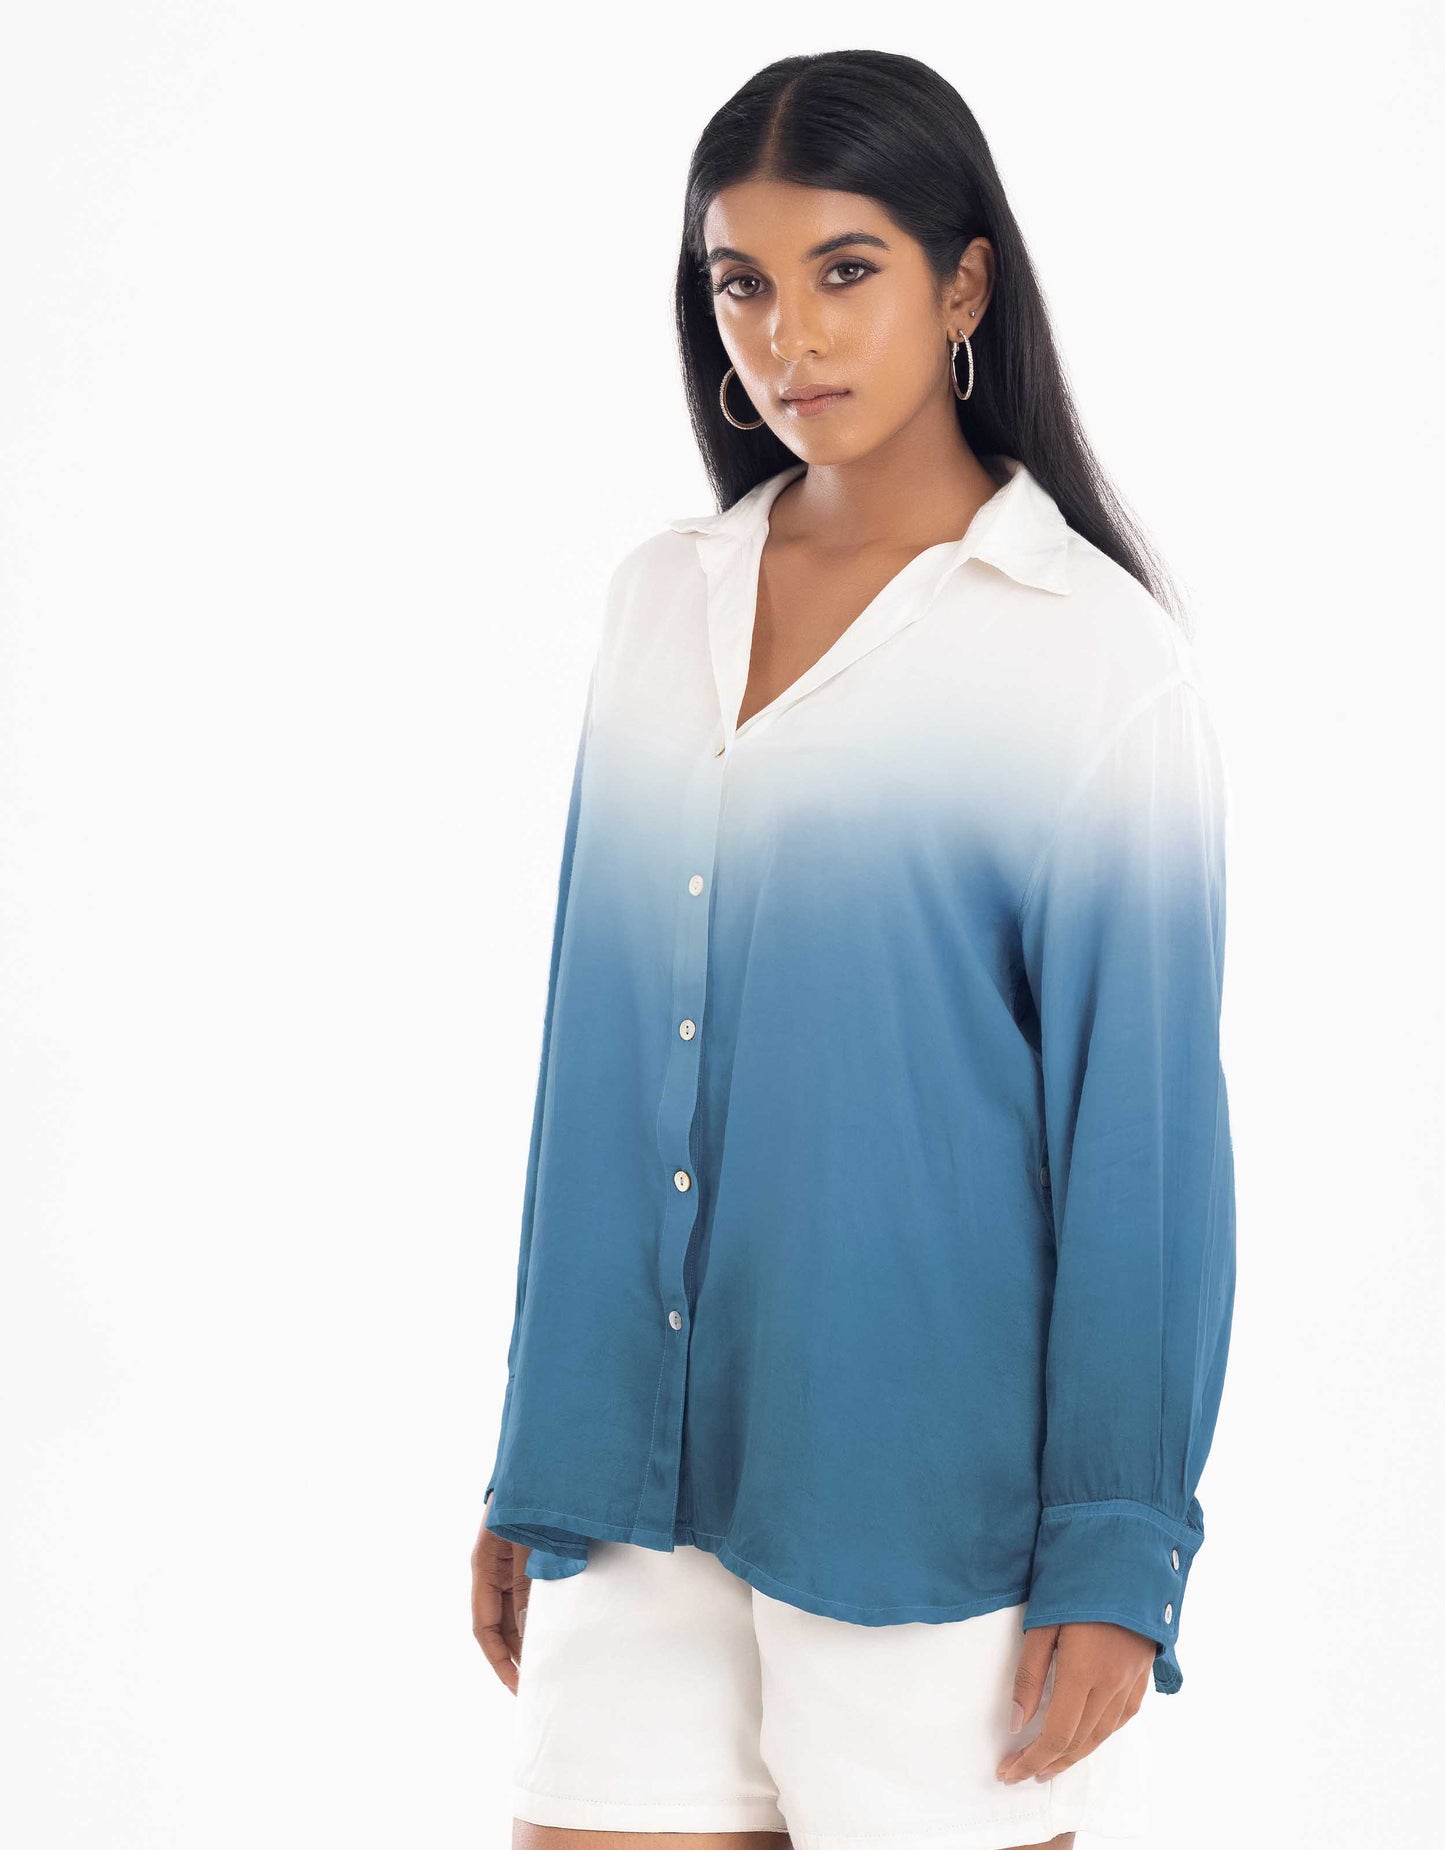 Hueloom teal convertible ombre oversized shirt front view in regular shirt style.